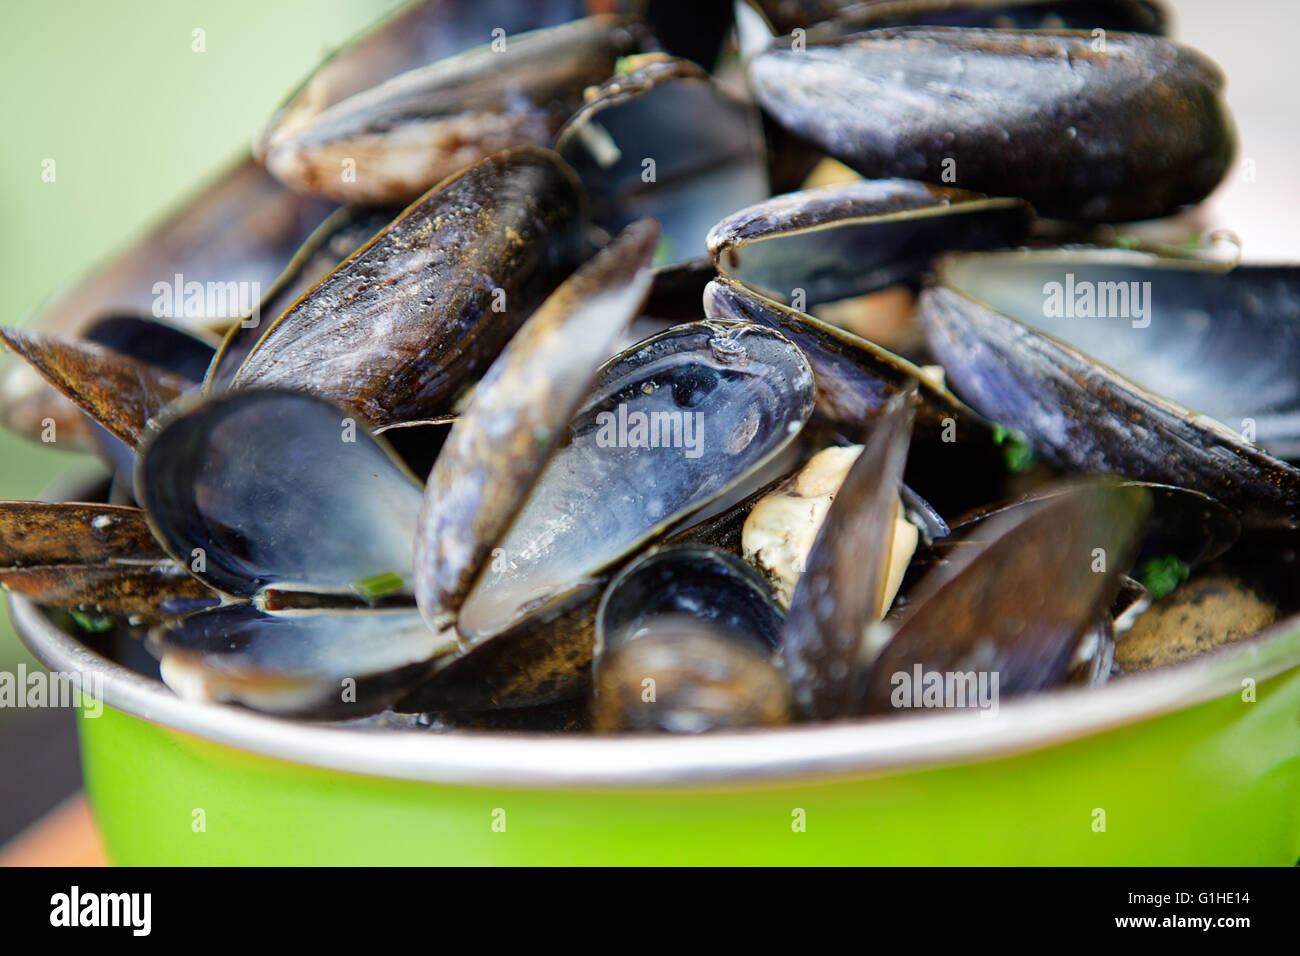 Serving of fresh cooked blue mussels in pot Stock Photo